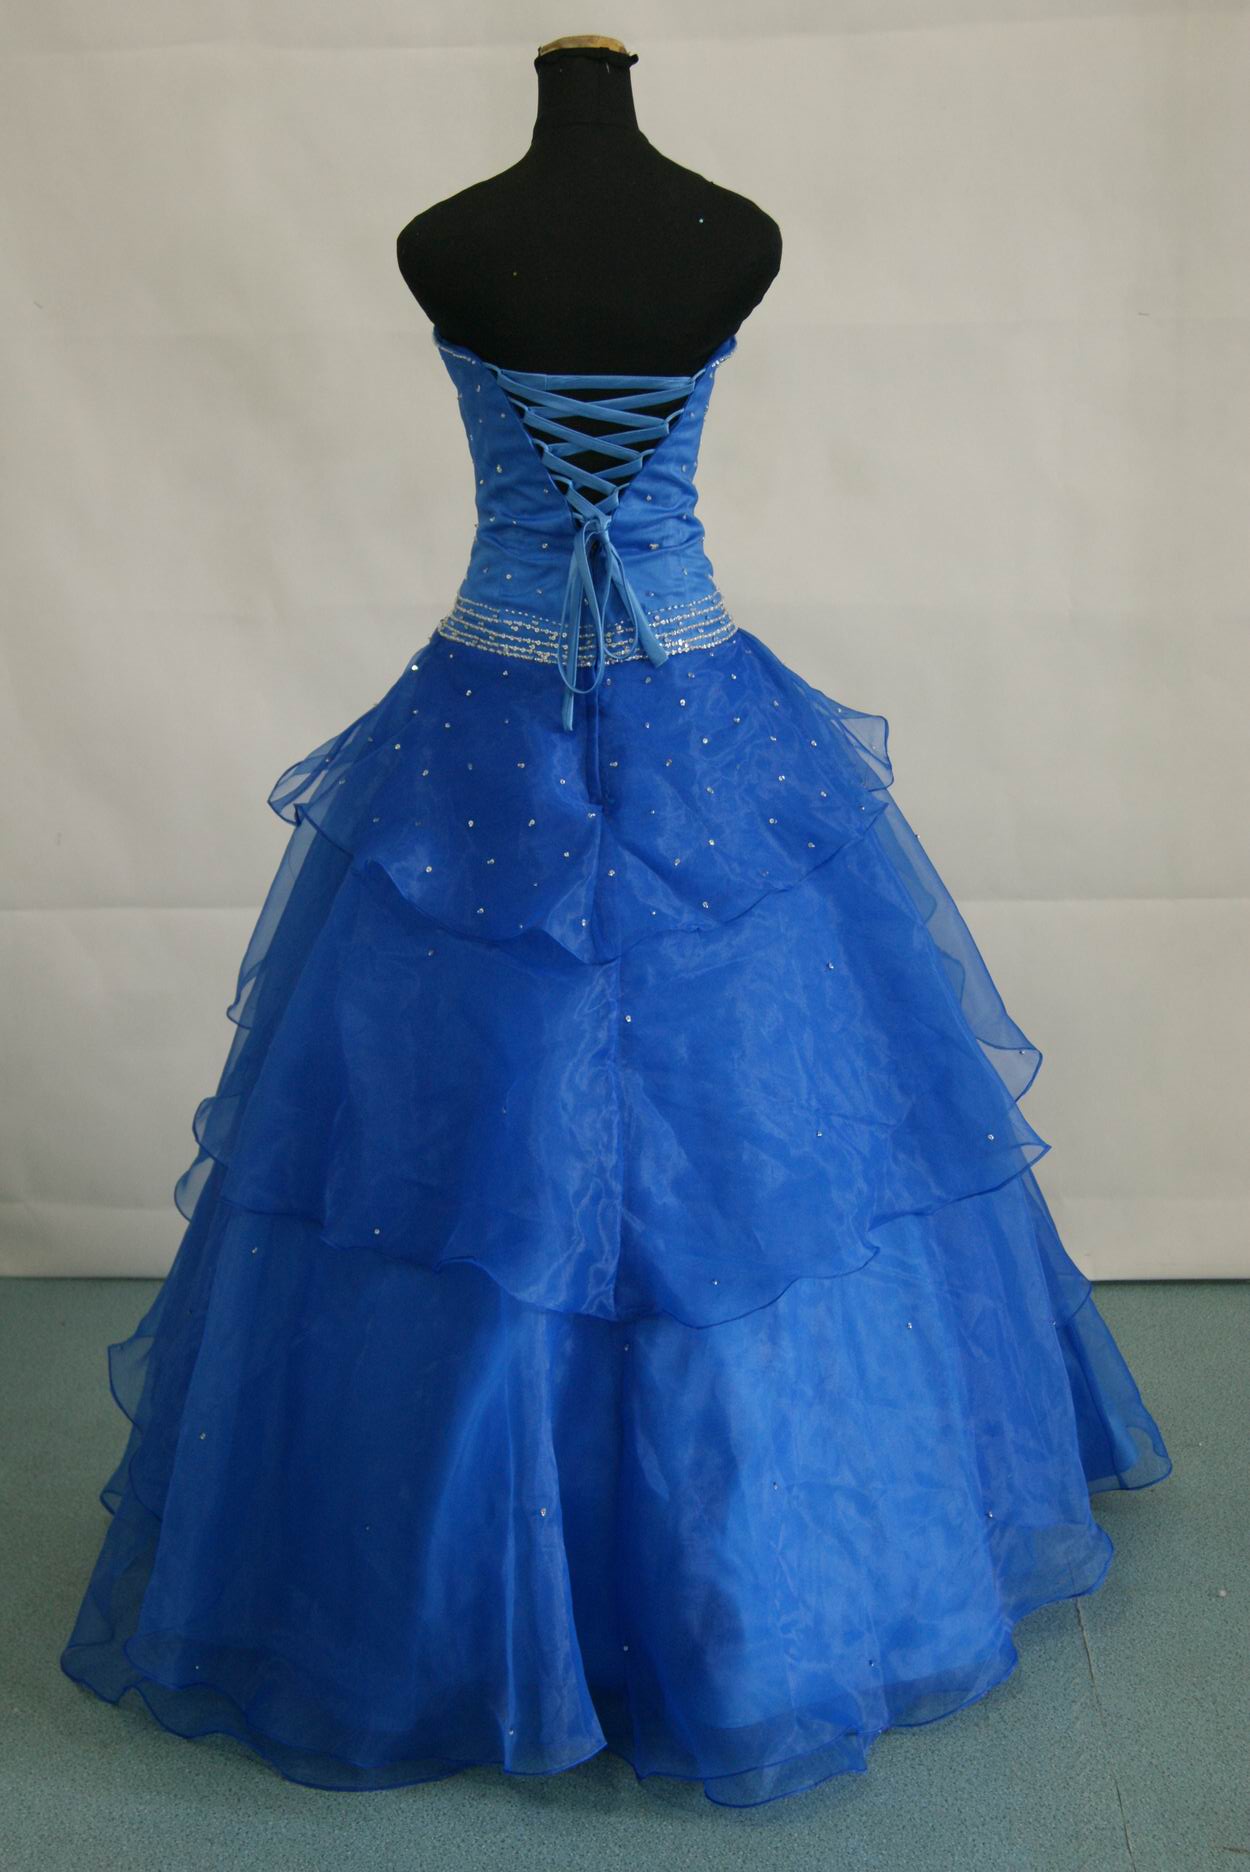 Prom dresses with corsets.